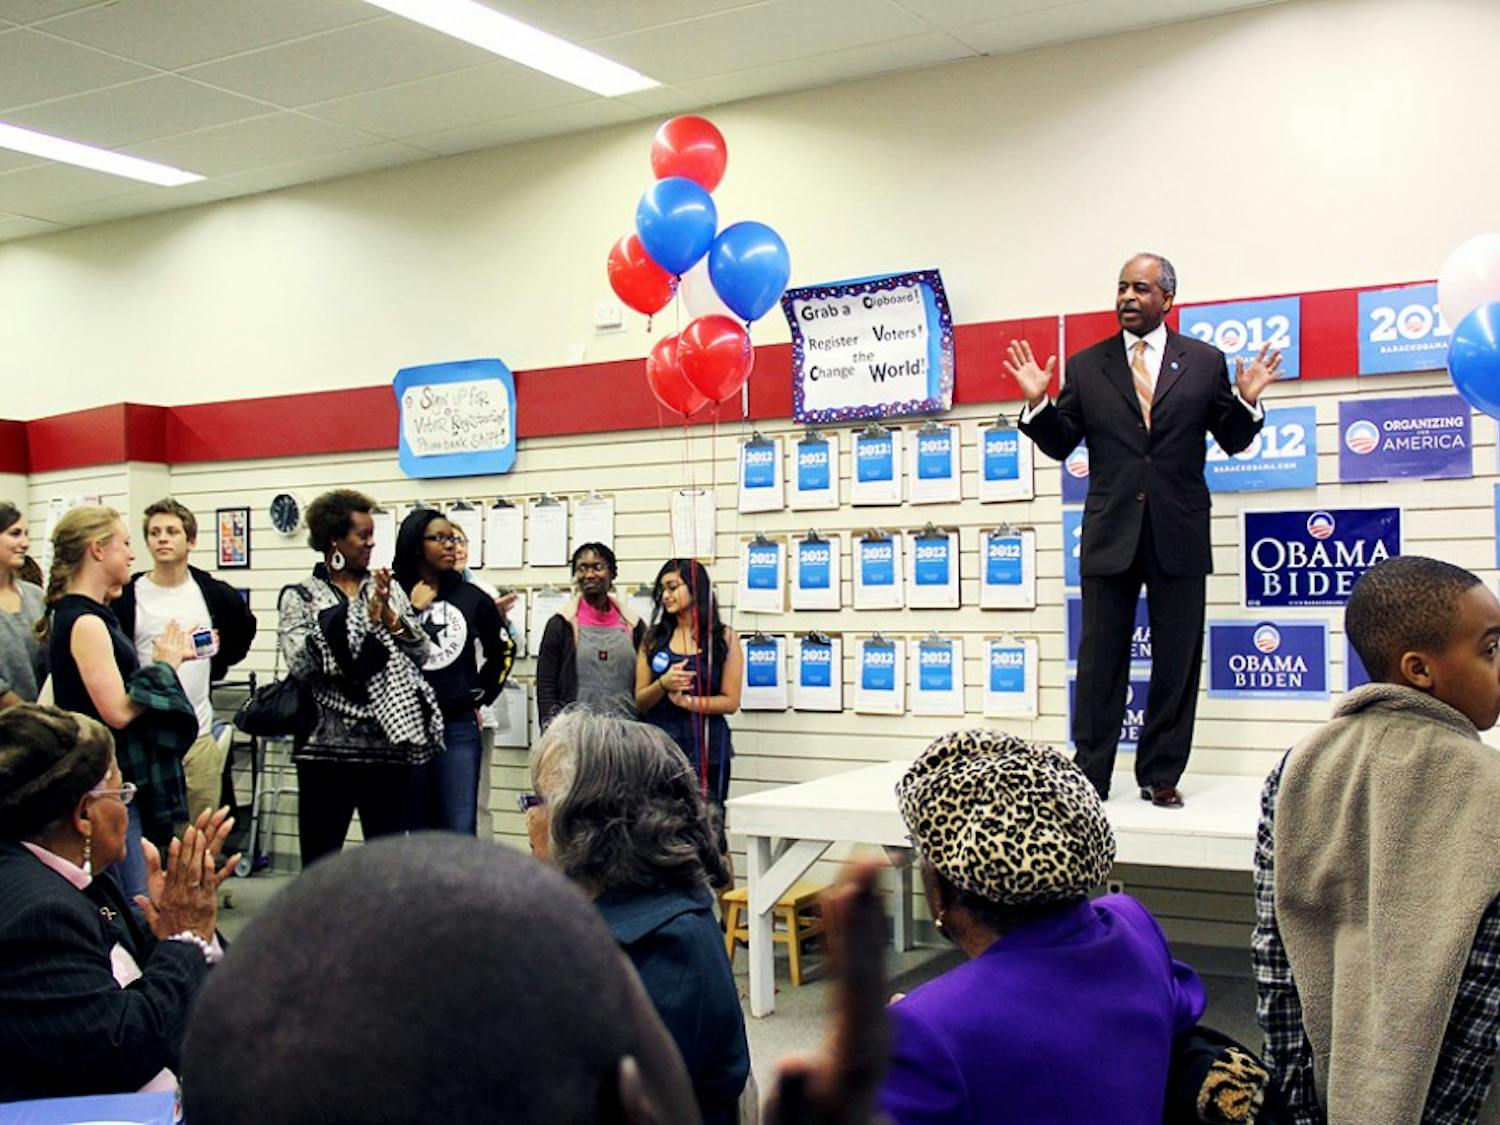 Durham Mayor Bill Bell speaks Wednesday at Barack Obama’s new campaign office in Durham.